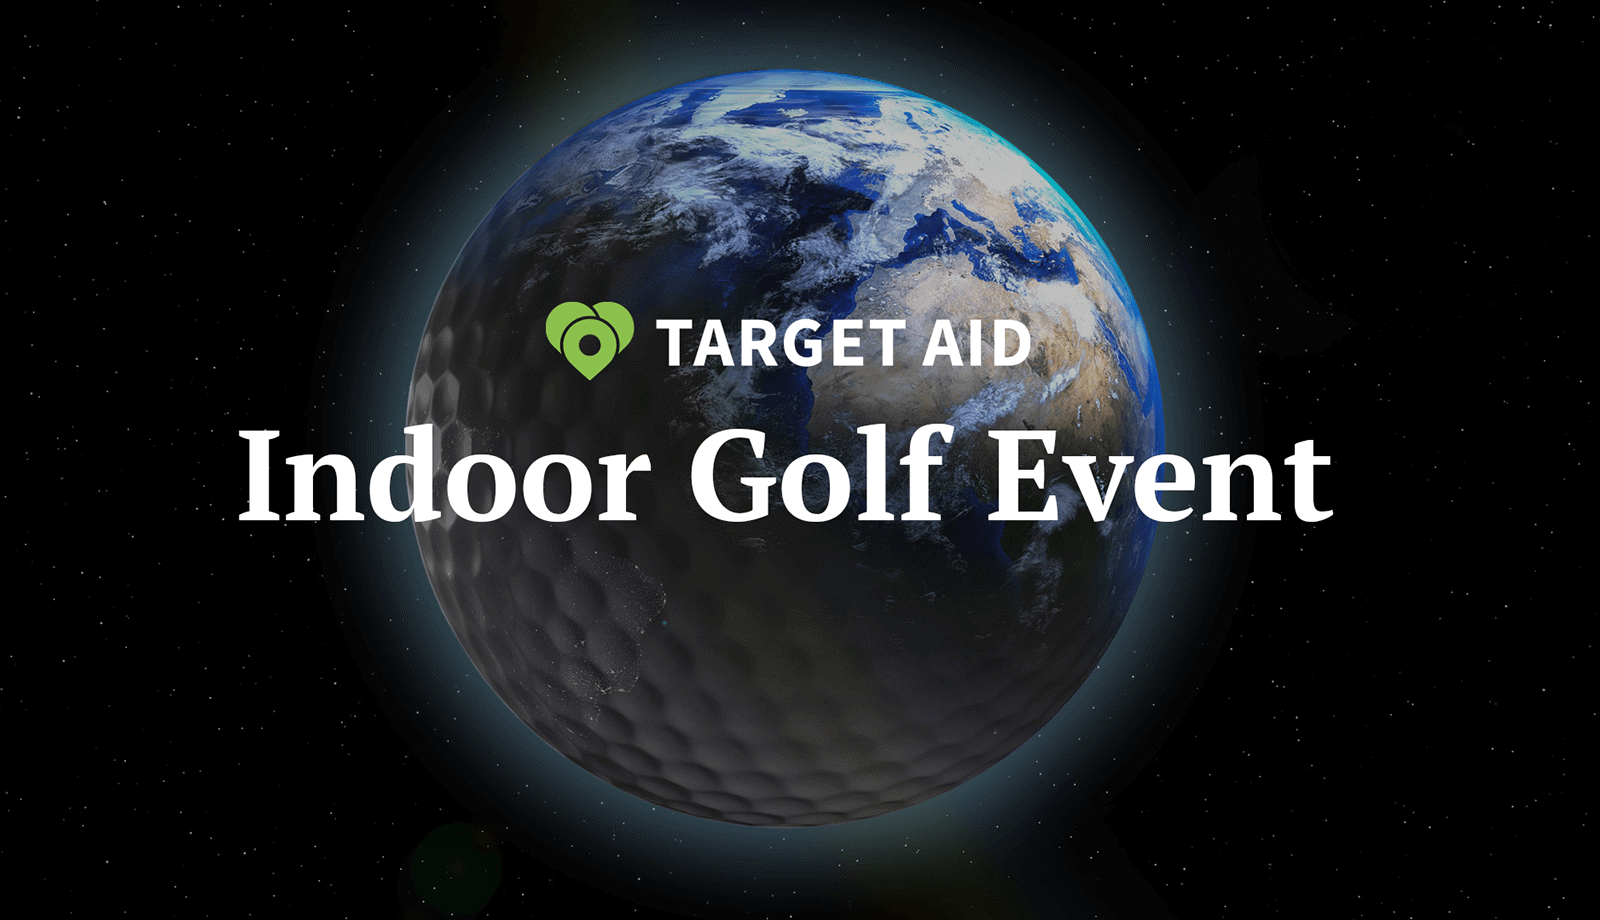 targetaid_Indoor-golf-globe_1600x920_tp.png